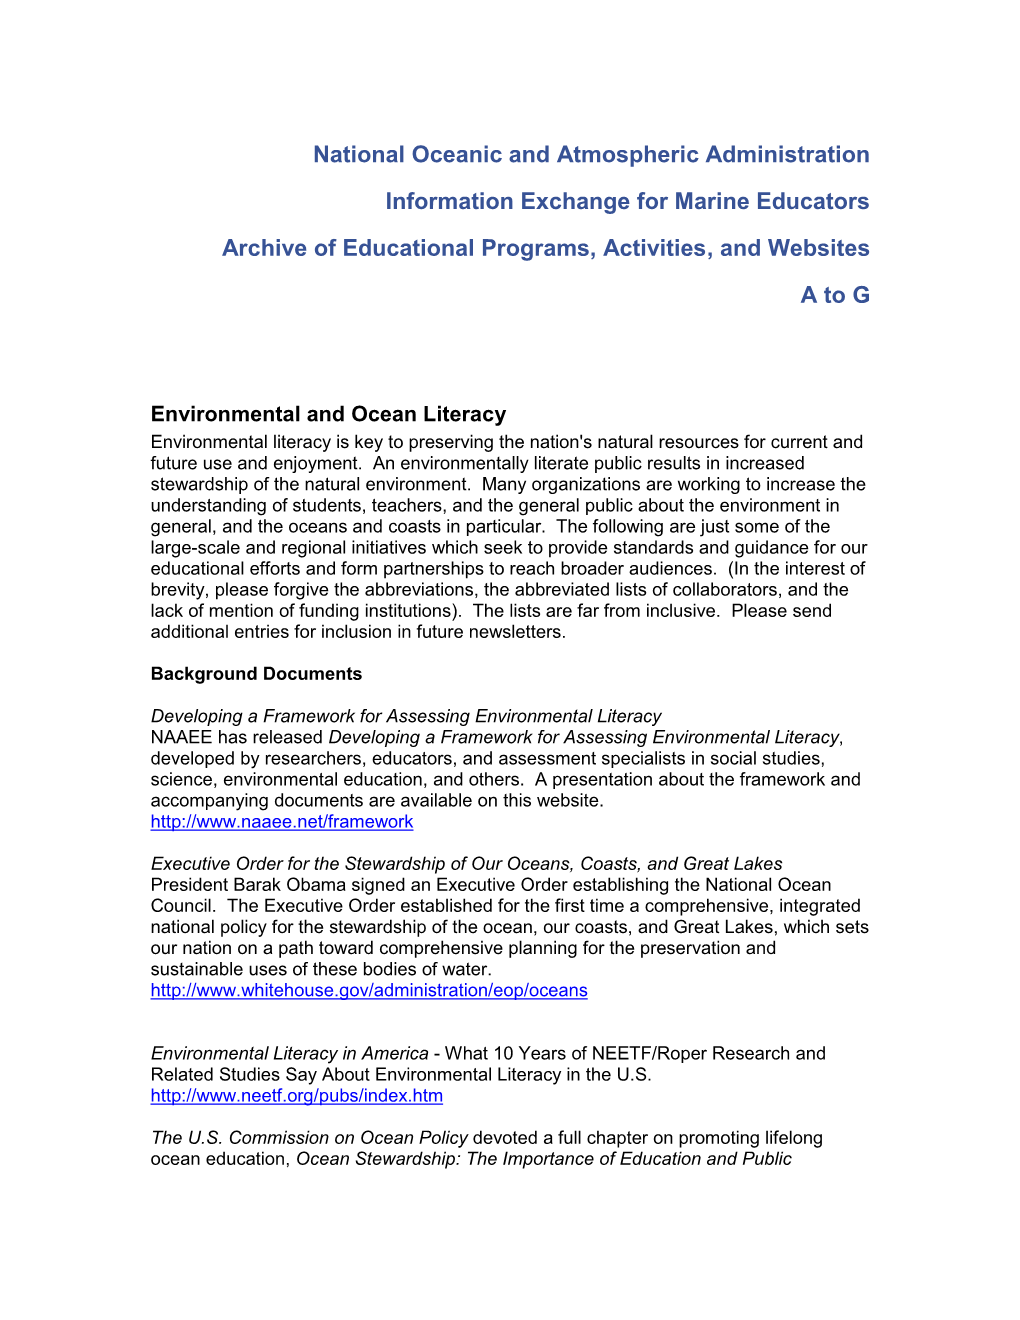 National Oceanic and Atmospheric Administration Information Exchange for Marine Educators